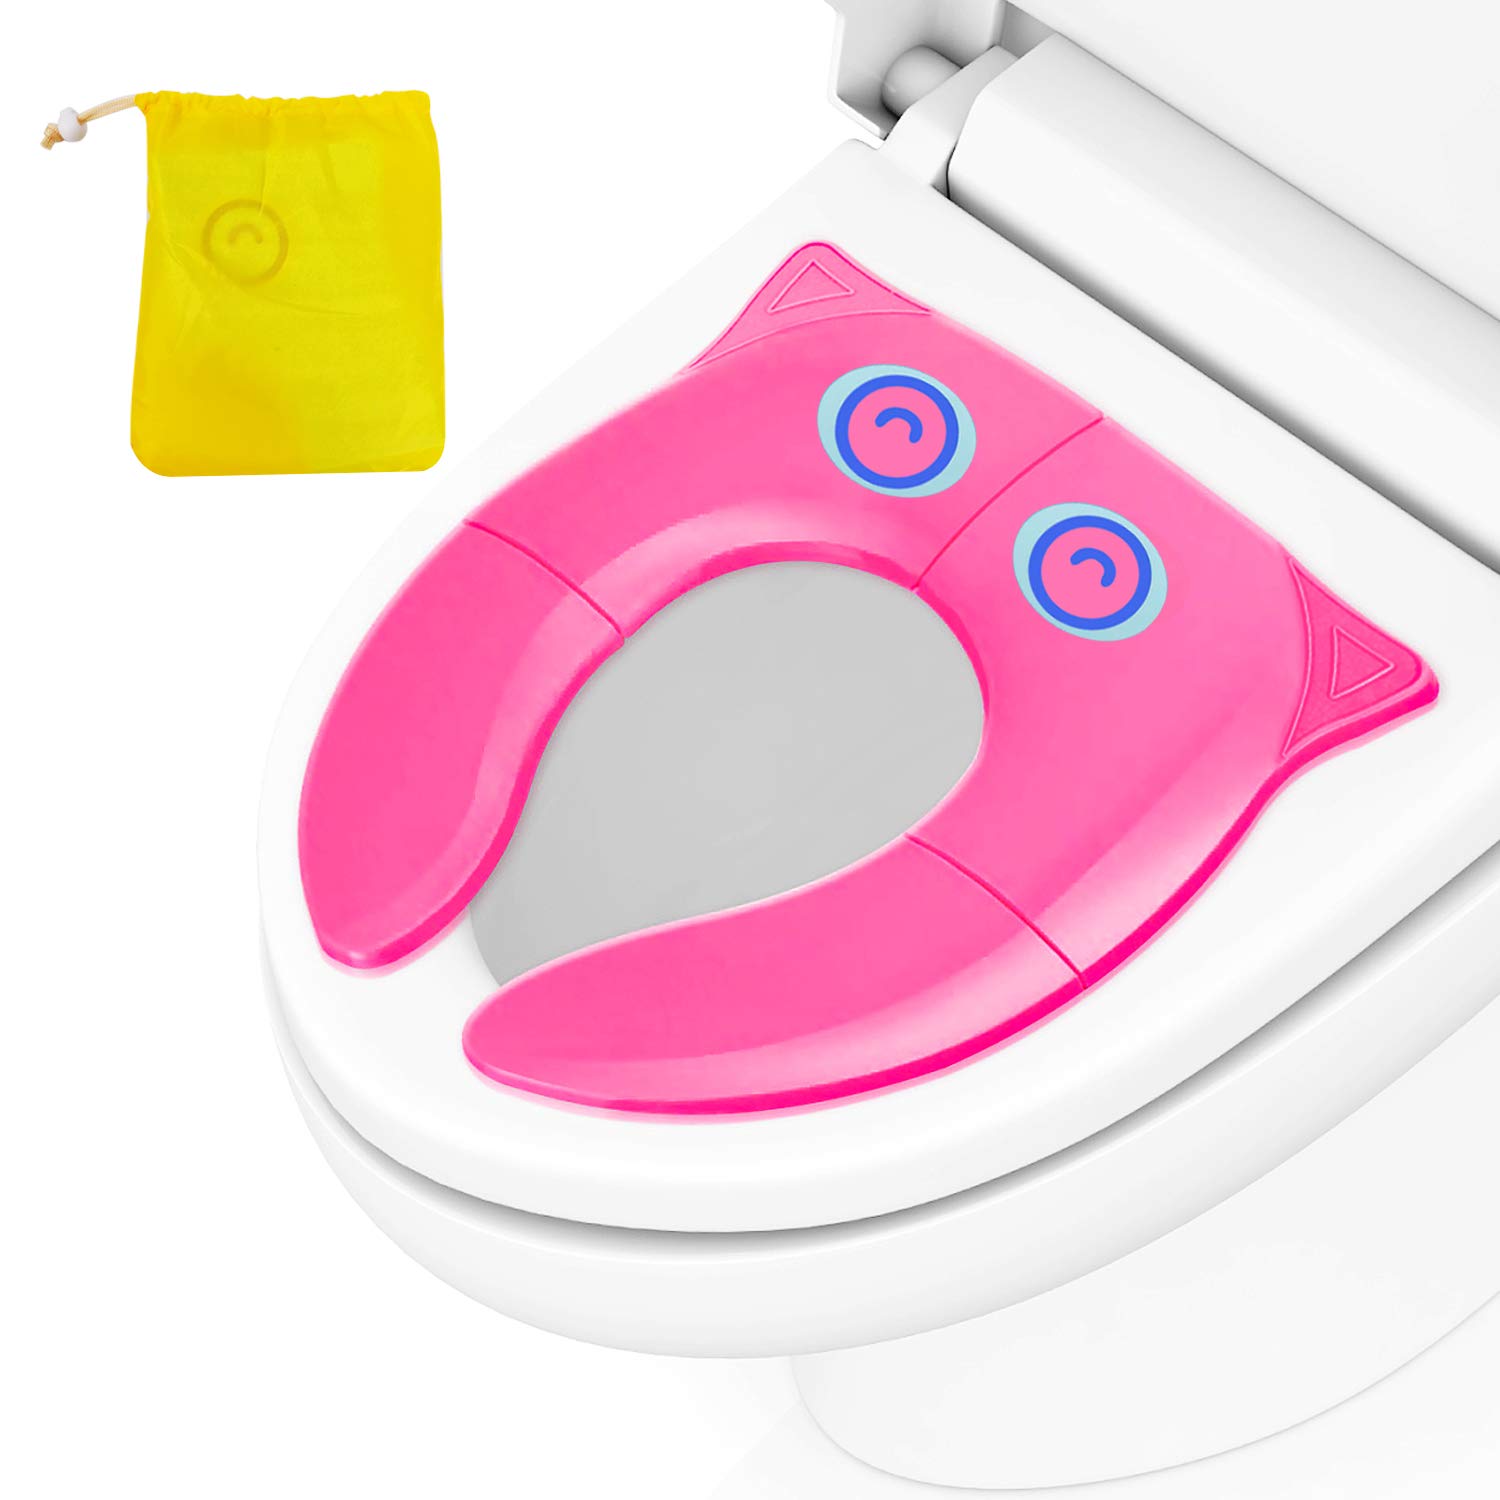 Book Cover Toilet Seat for Kids, TURN RAISE Folding Large Non Slip Silicone Pads Travel Portable Reusable Toilet Potty Training Seat Covers Liners with Carry Bag for Babies, Toddlers and Kids (Pink)